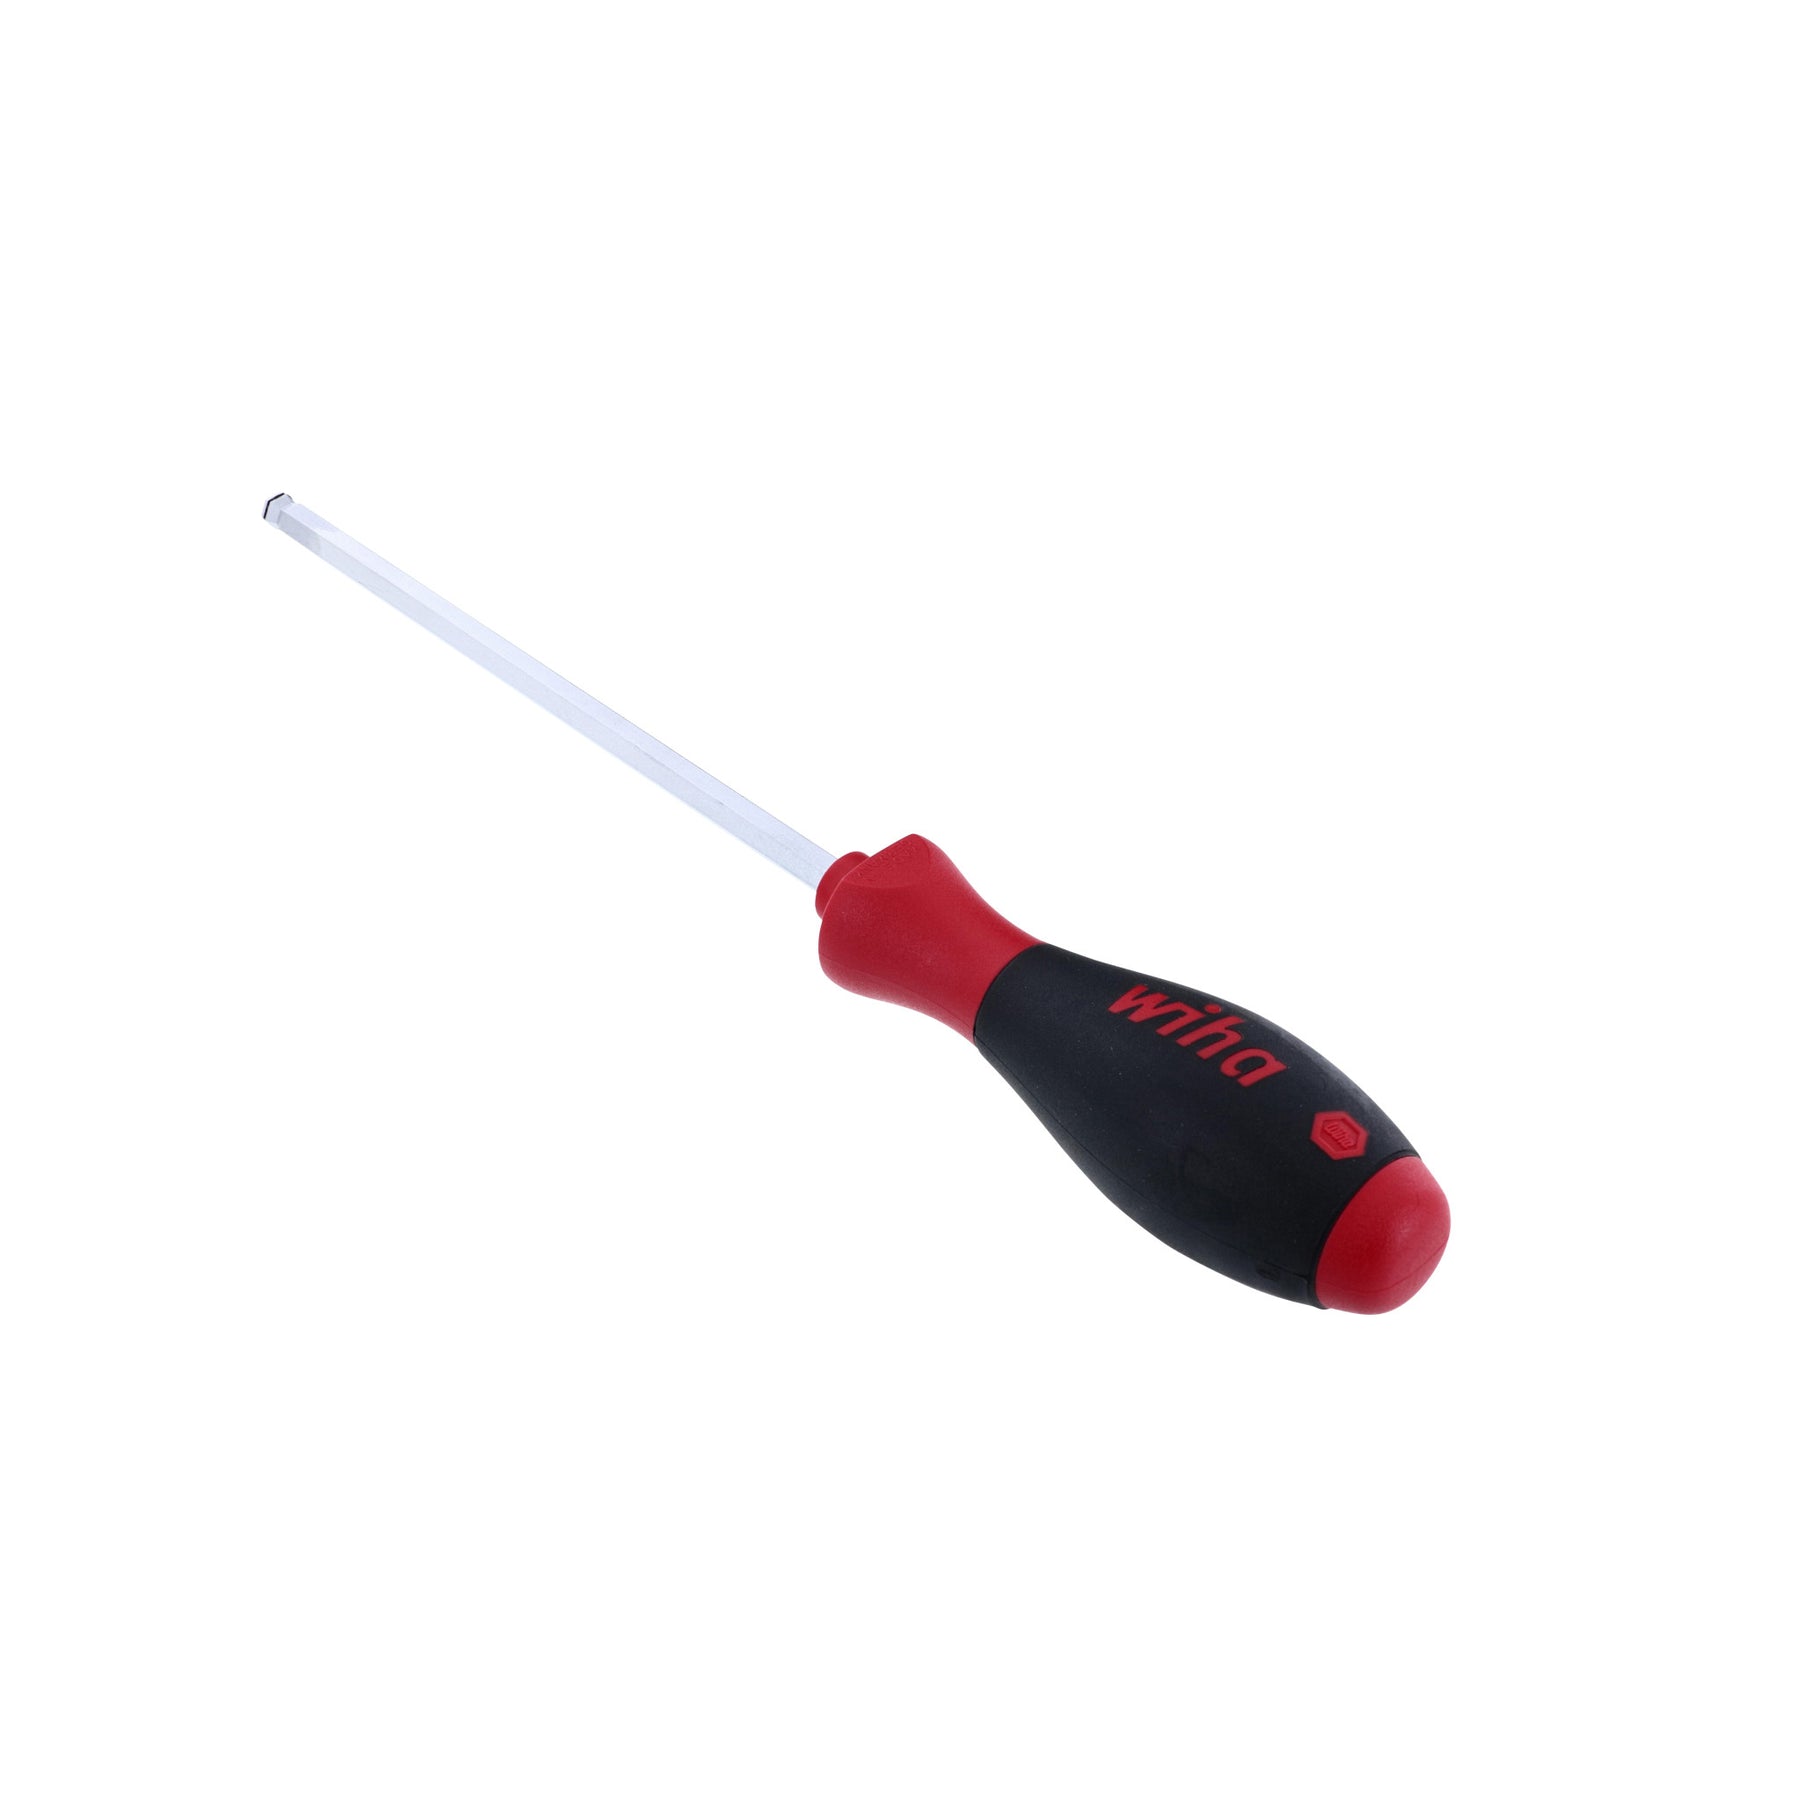 SoftFinish MagicRing Ball End Screwdriver 1/4"